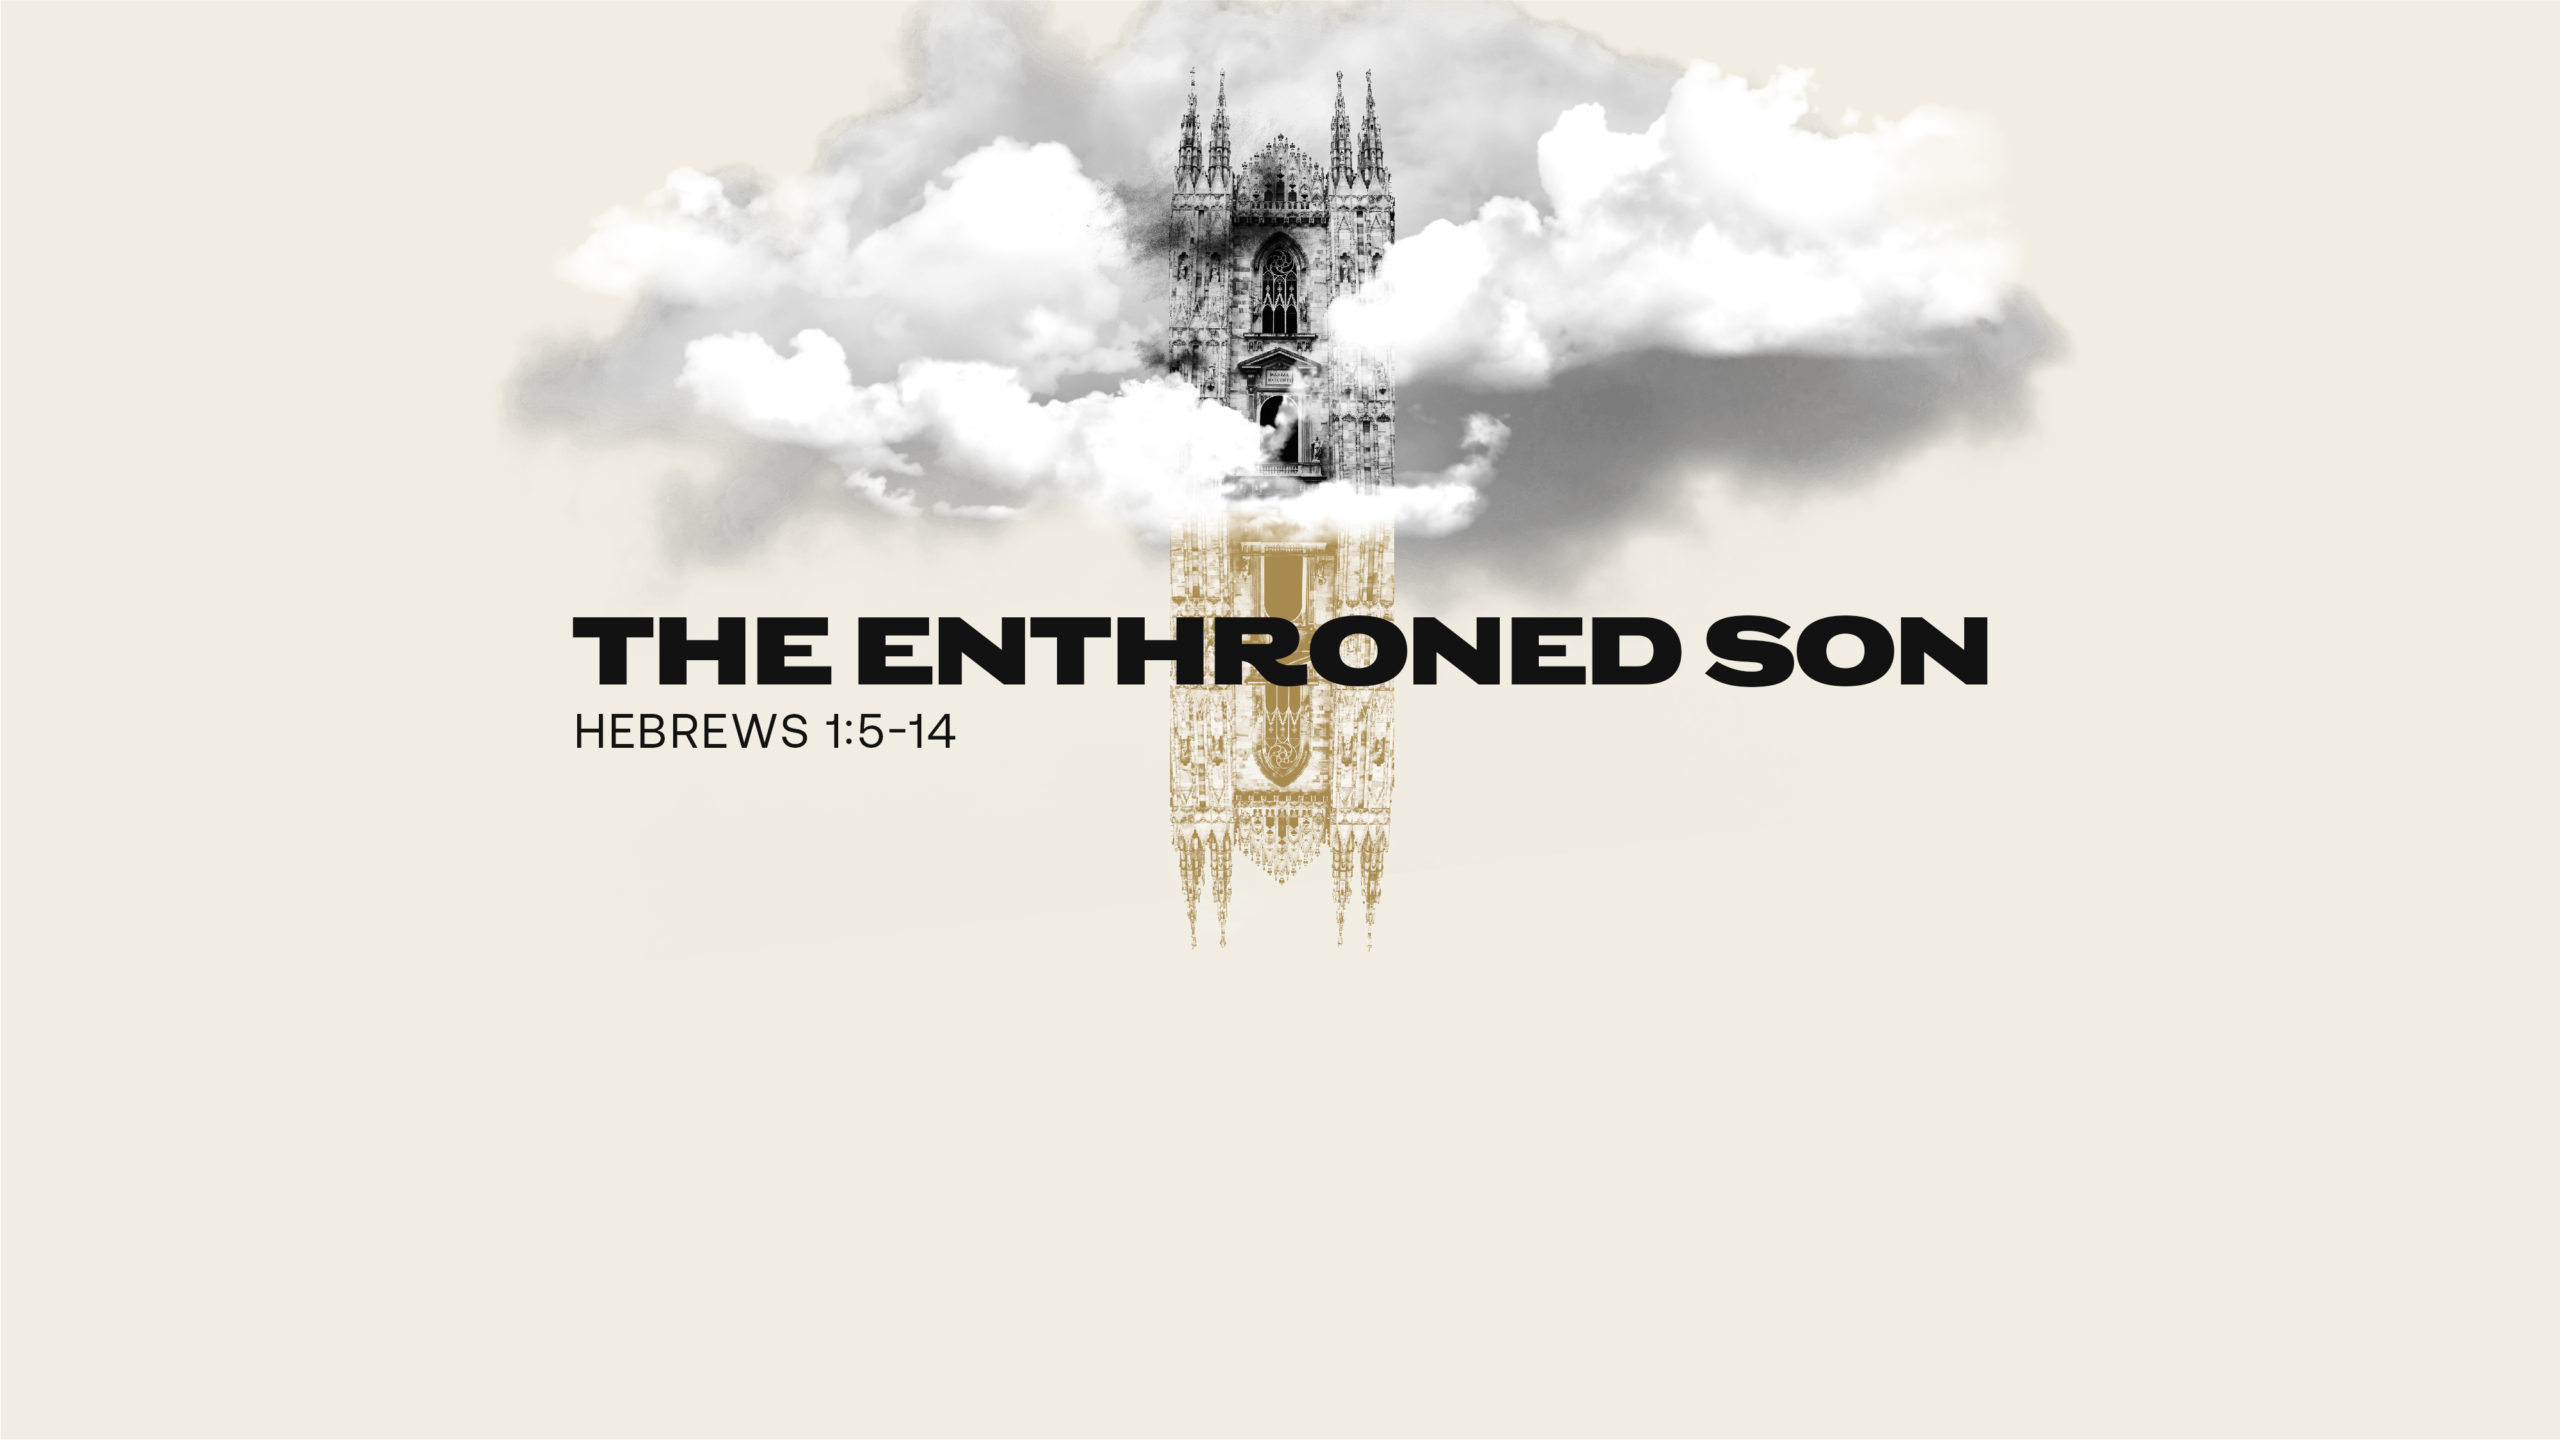 The Enthroned Son